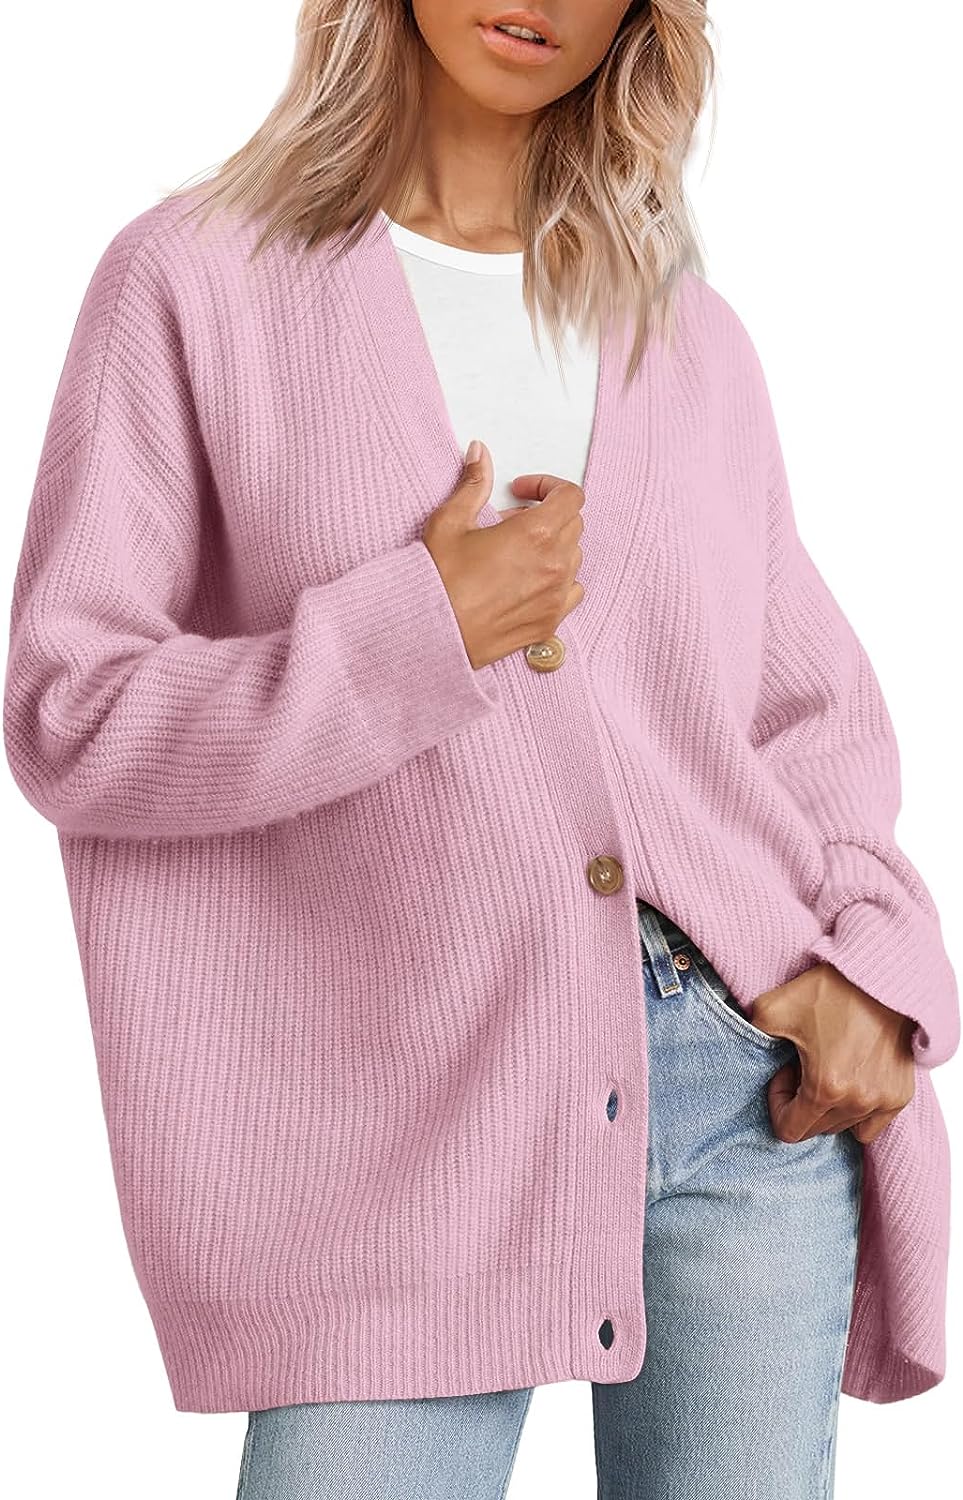 LILLUSORY Women's Petite Cardigan Sweaters Open Front Button Down Chunky  Knit Tweed Cardigans Jackets with Pockets Cream at  Women's Clothing  store